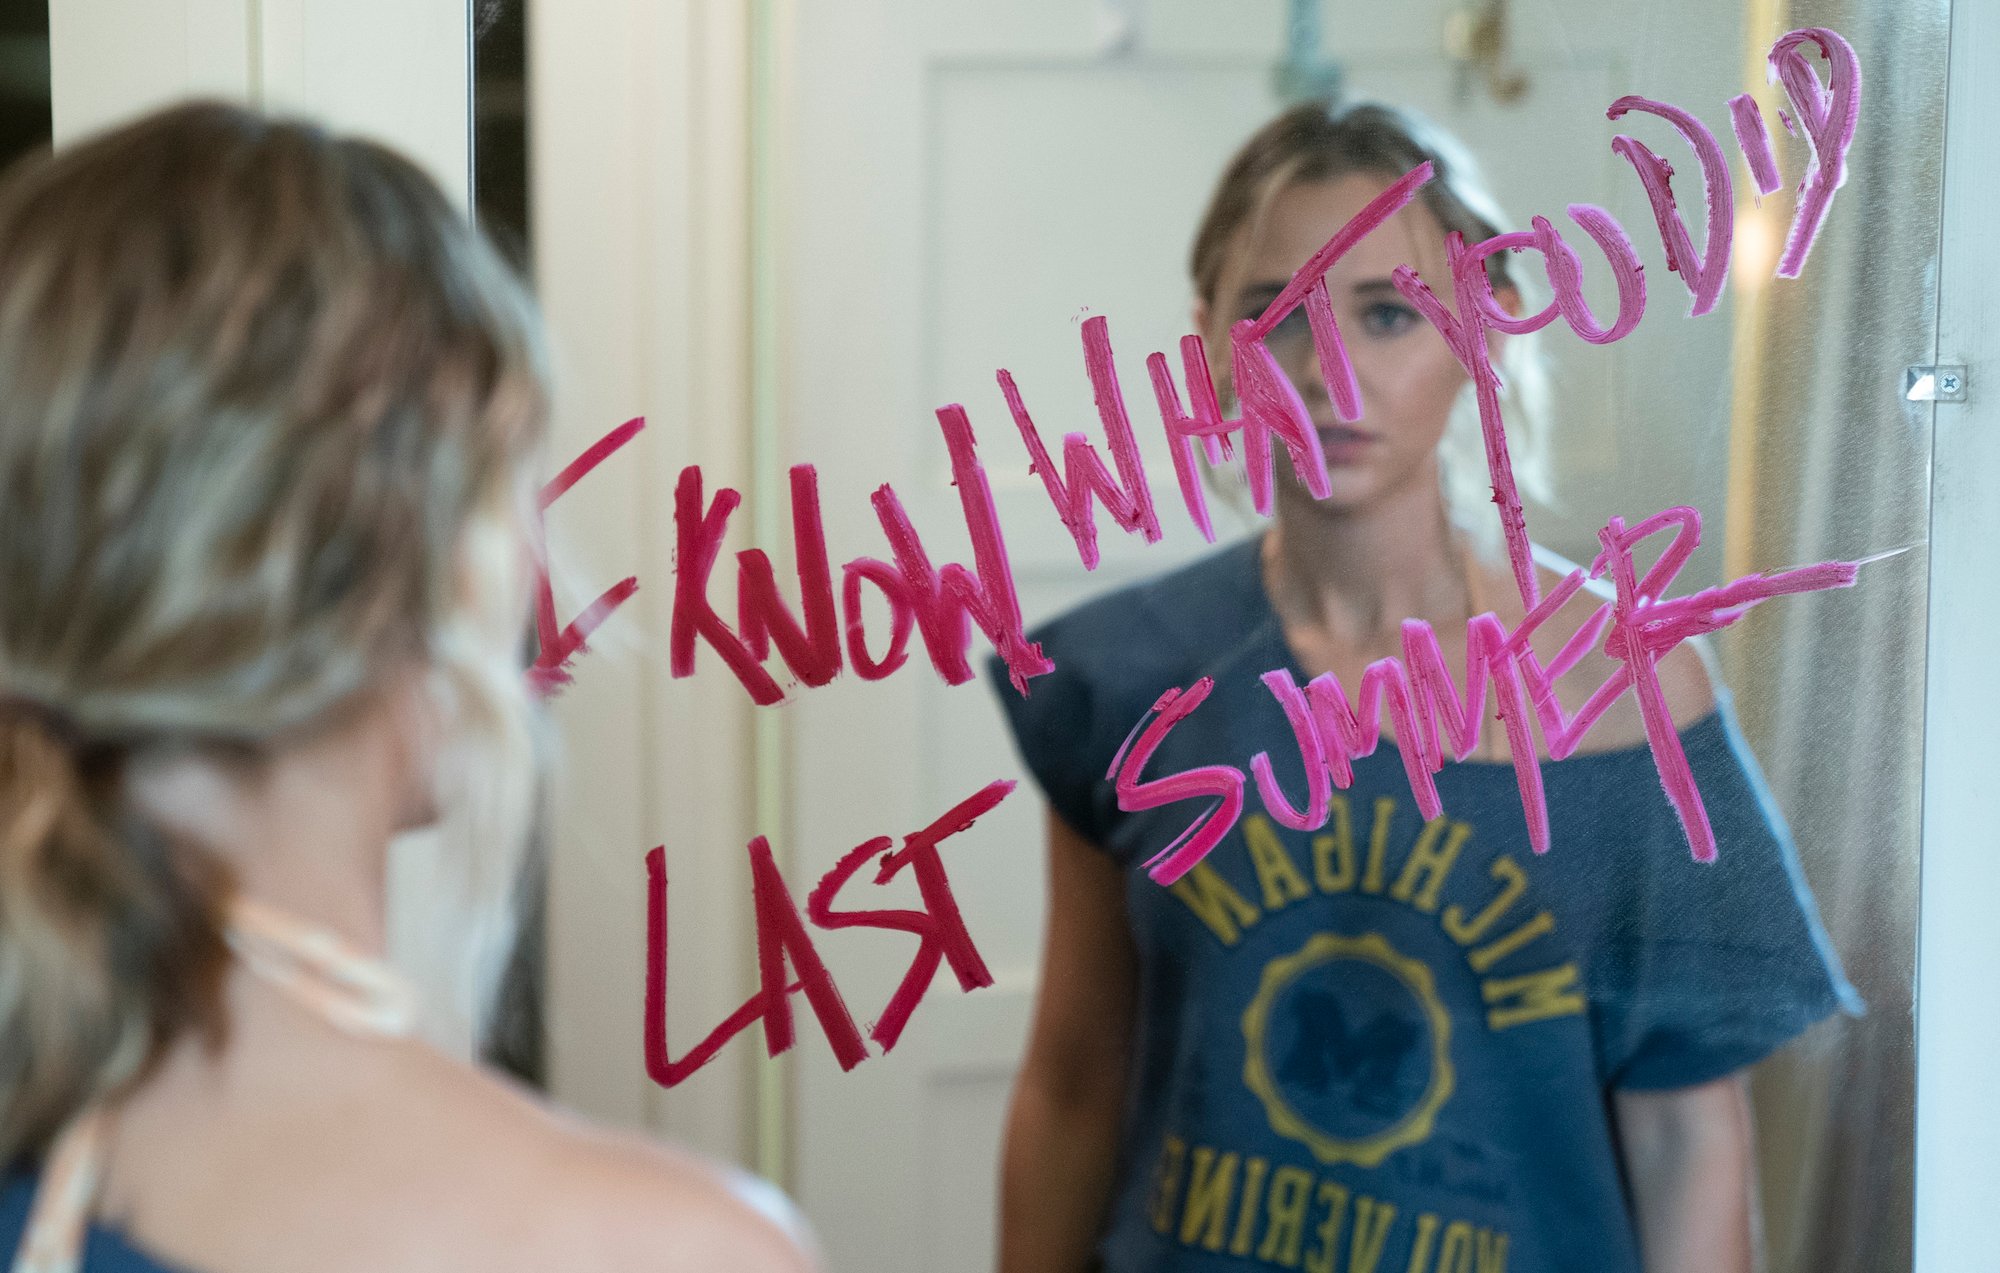 Madison Iseman sees I Know What You Did Last Summer written on the mirror